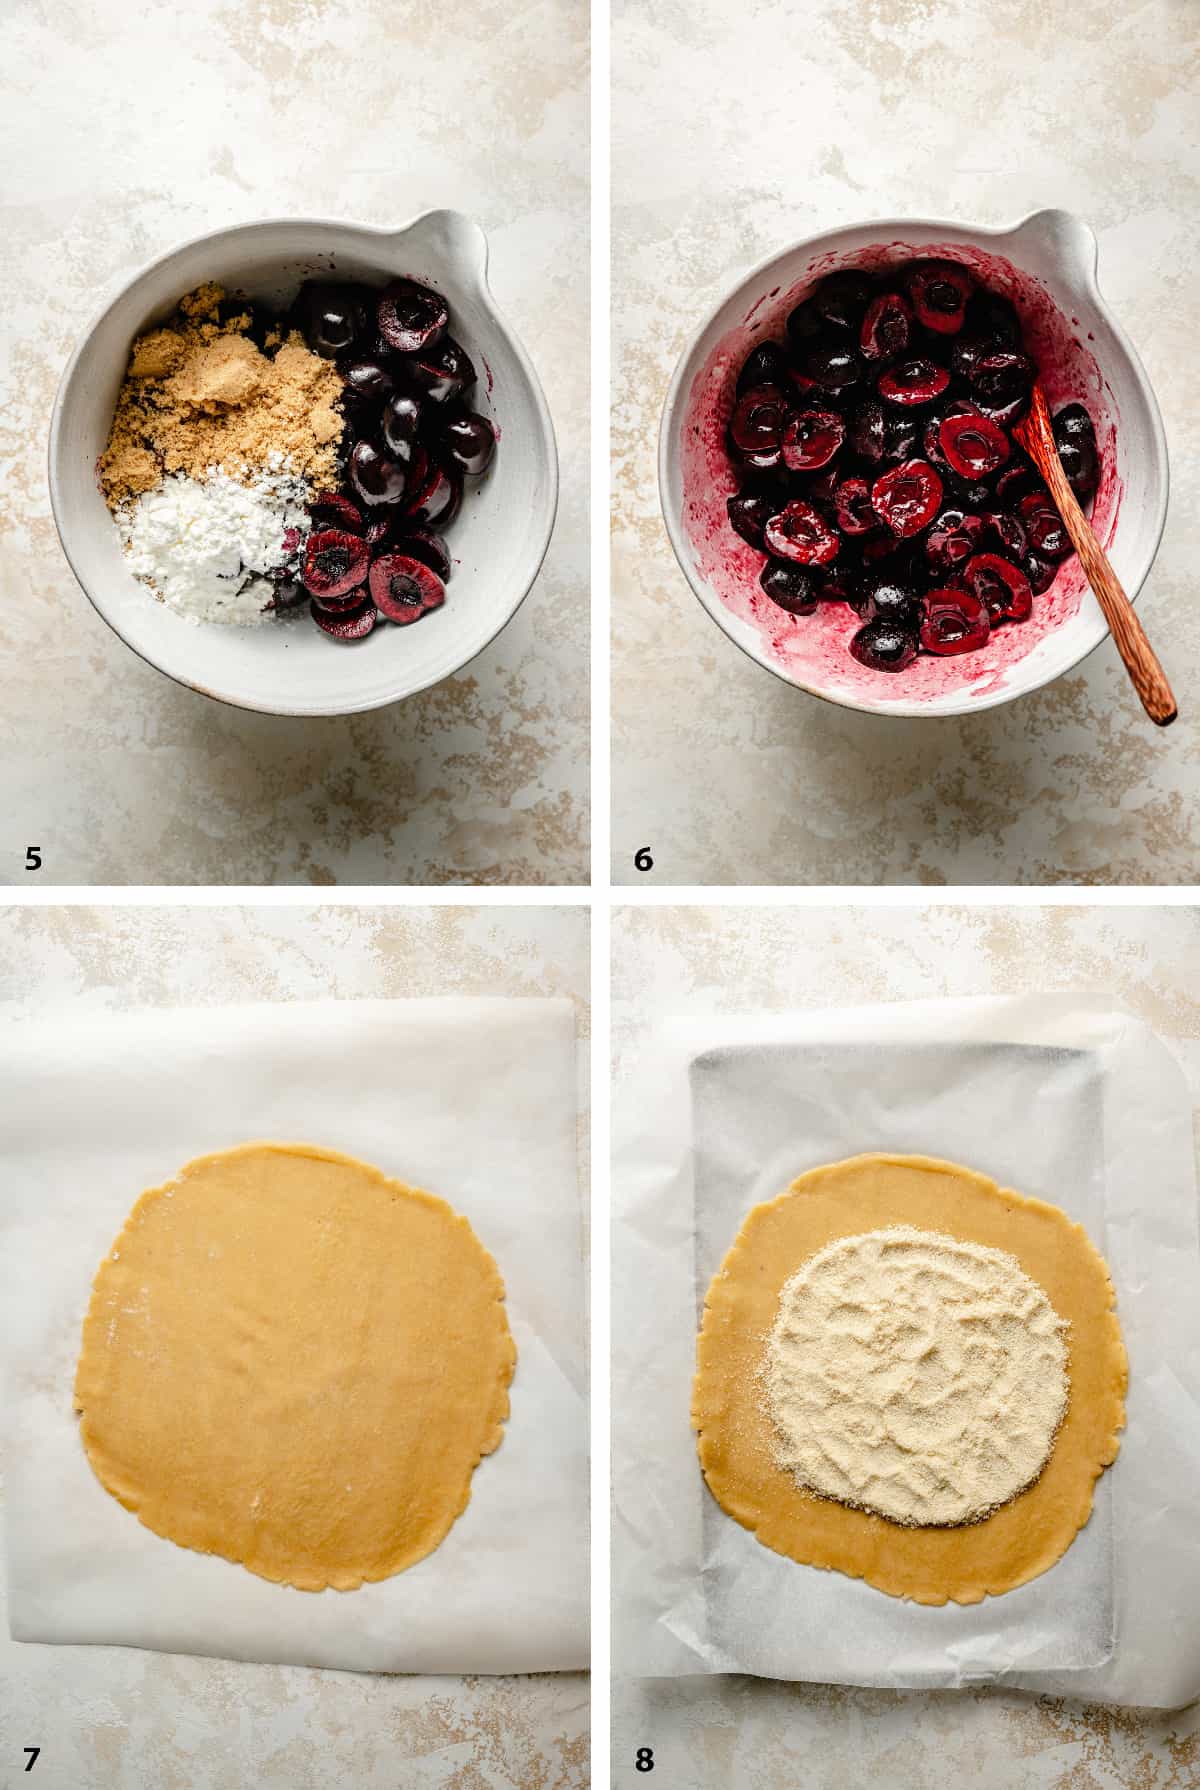 Steps of making the cherry filling in a bowl, rolling out pastry and almond flour on the pastry base.